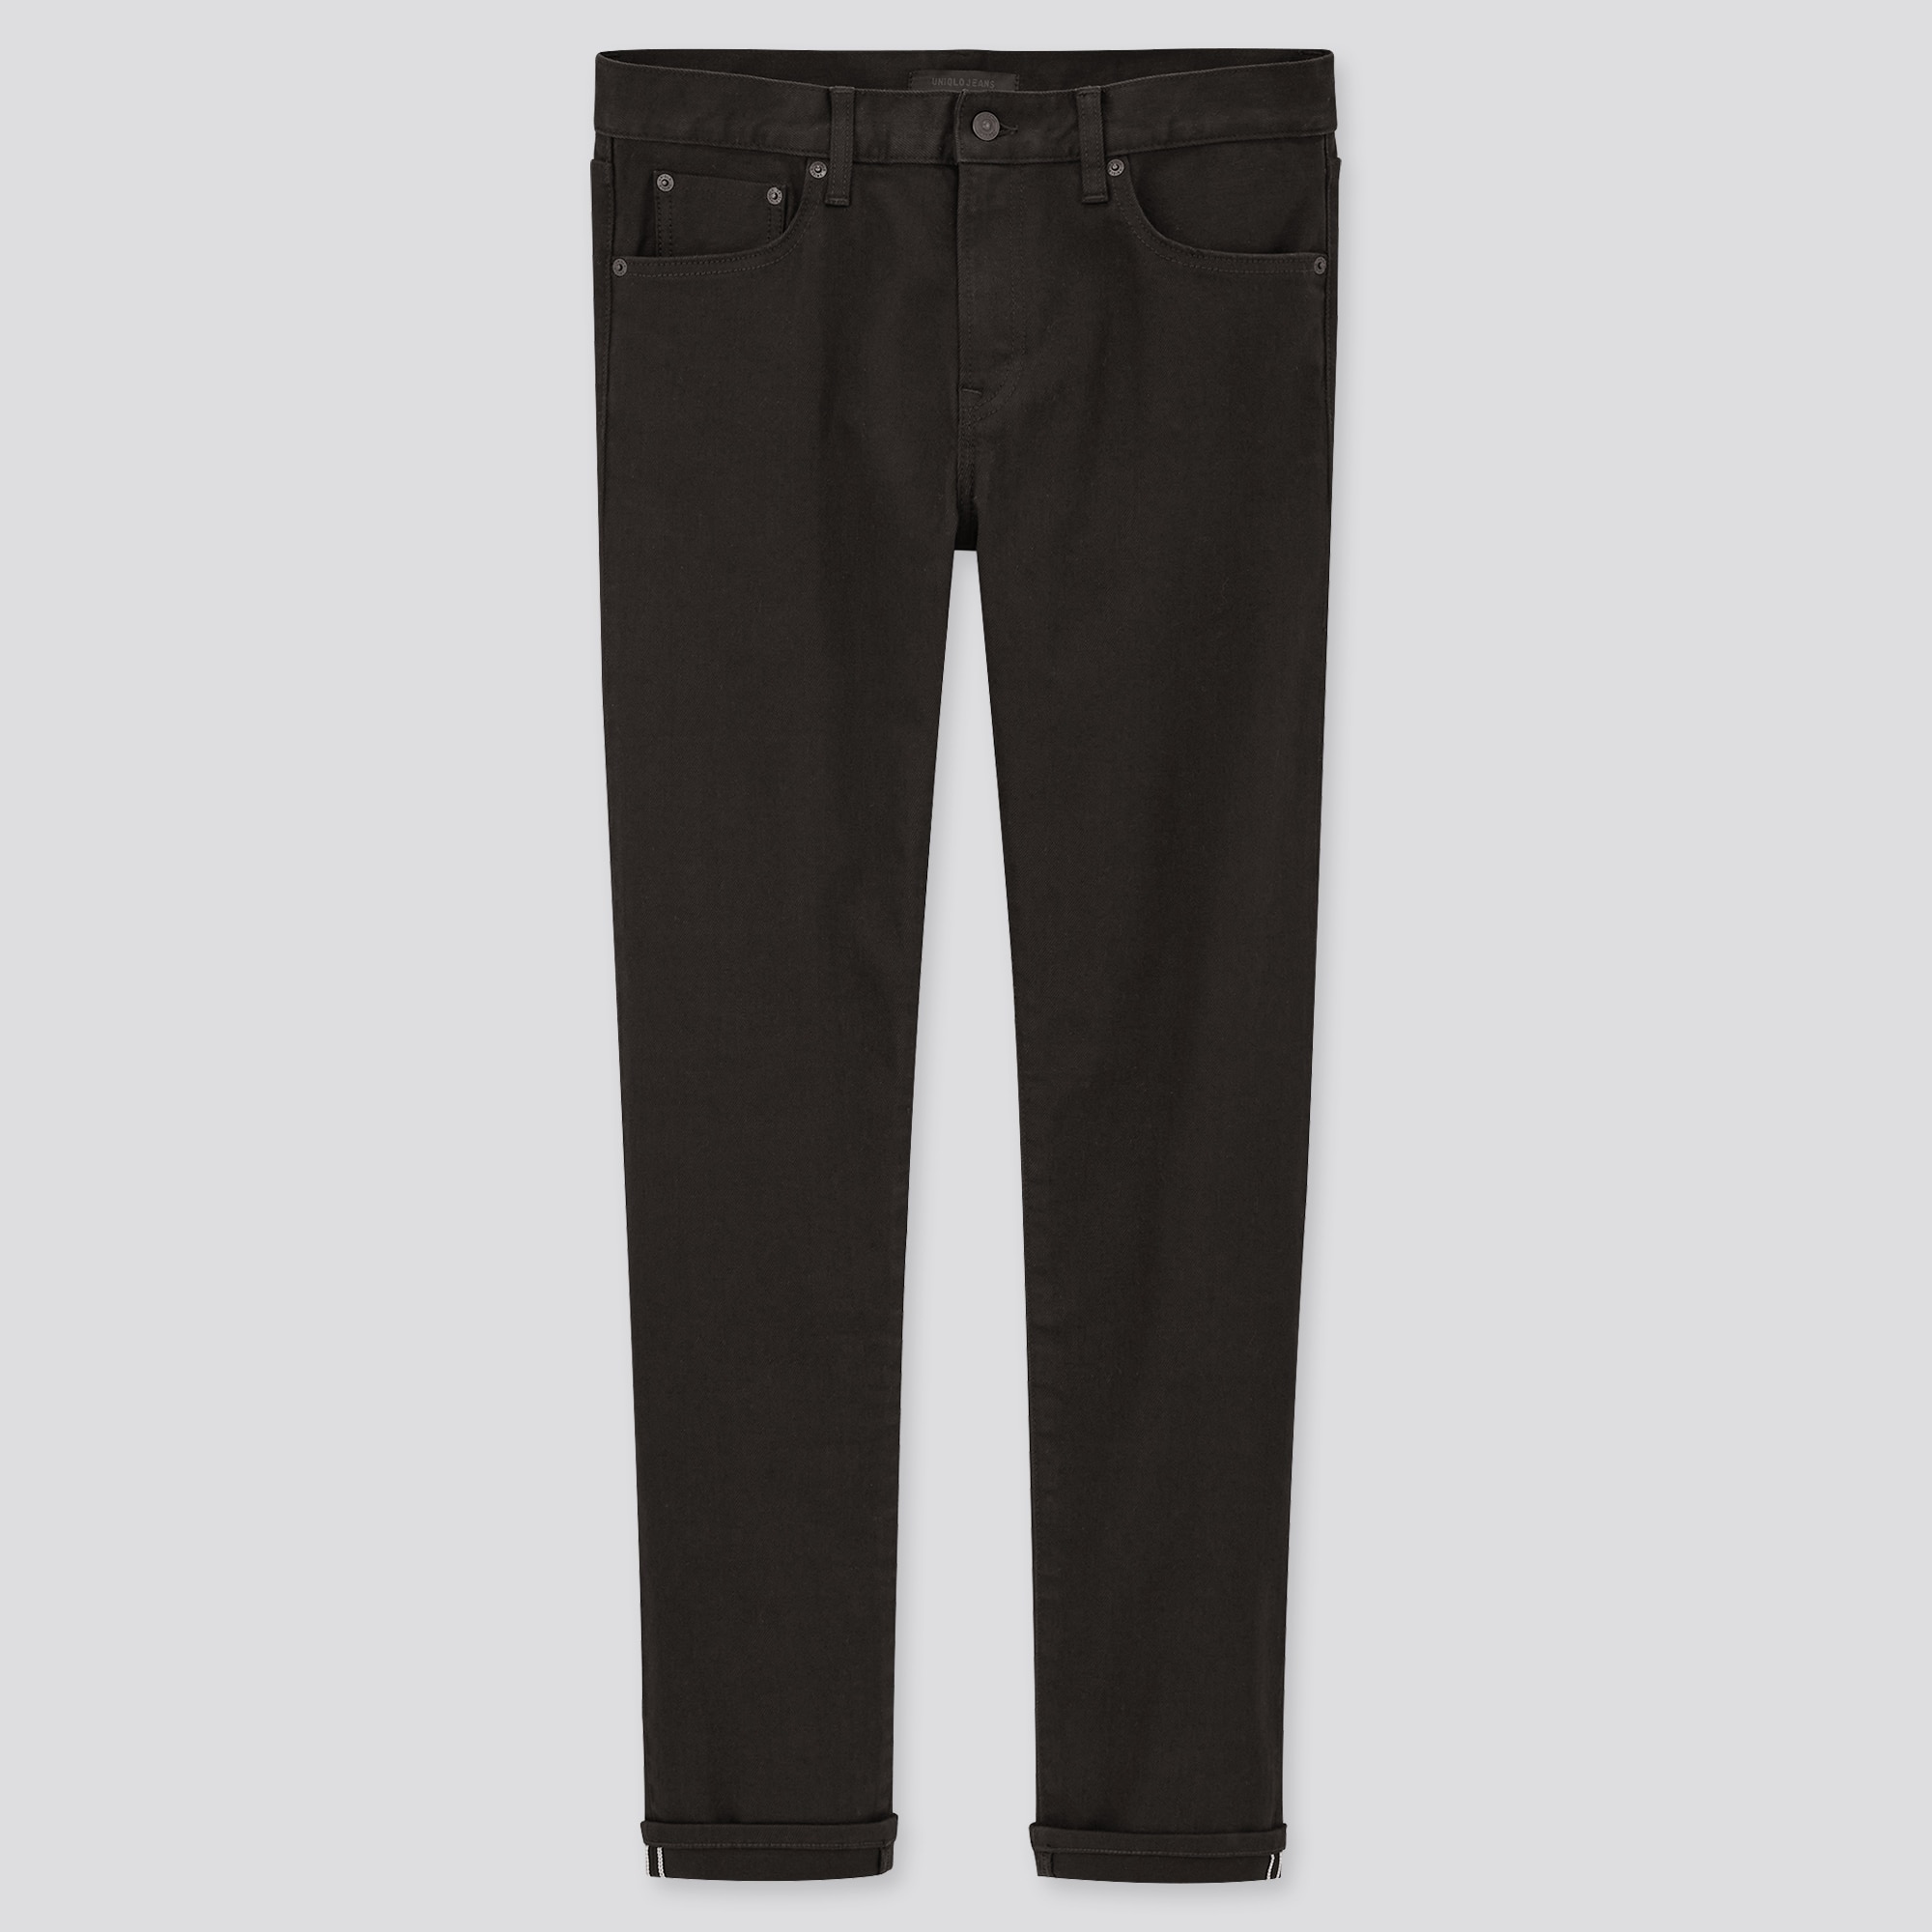 uniqlo cycling jeans